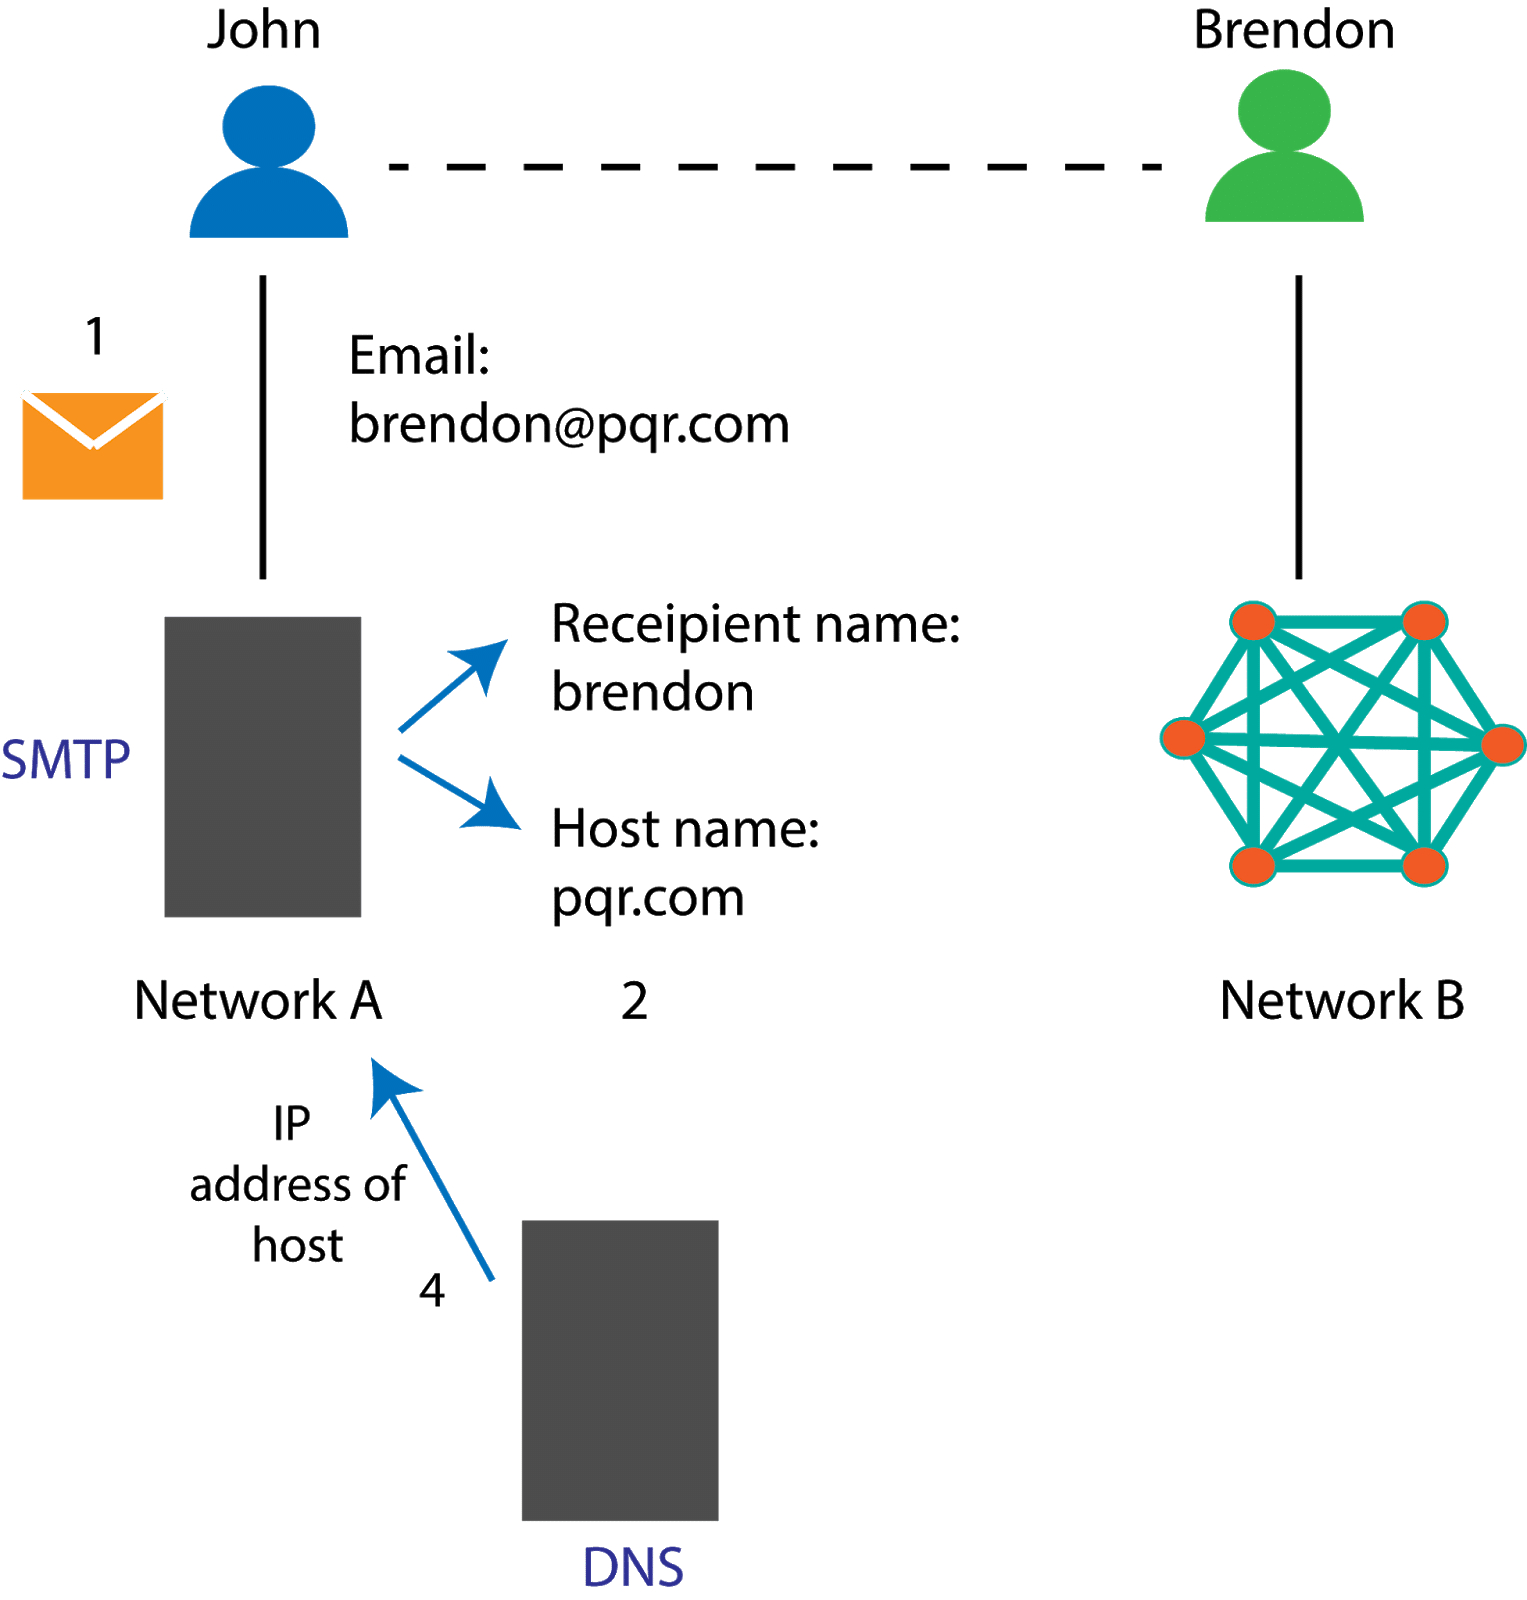 How emails are sent [the action of the SMTP servers]